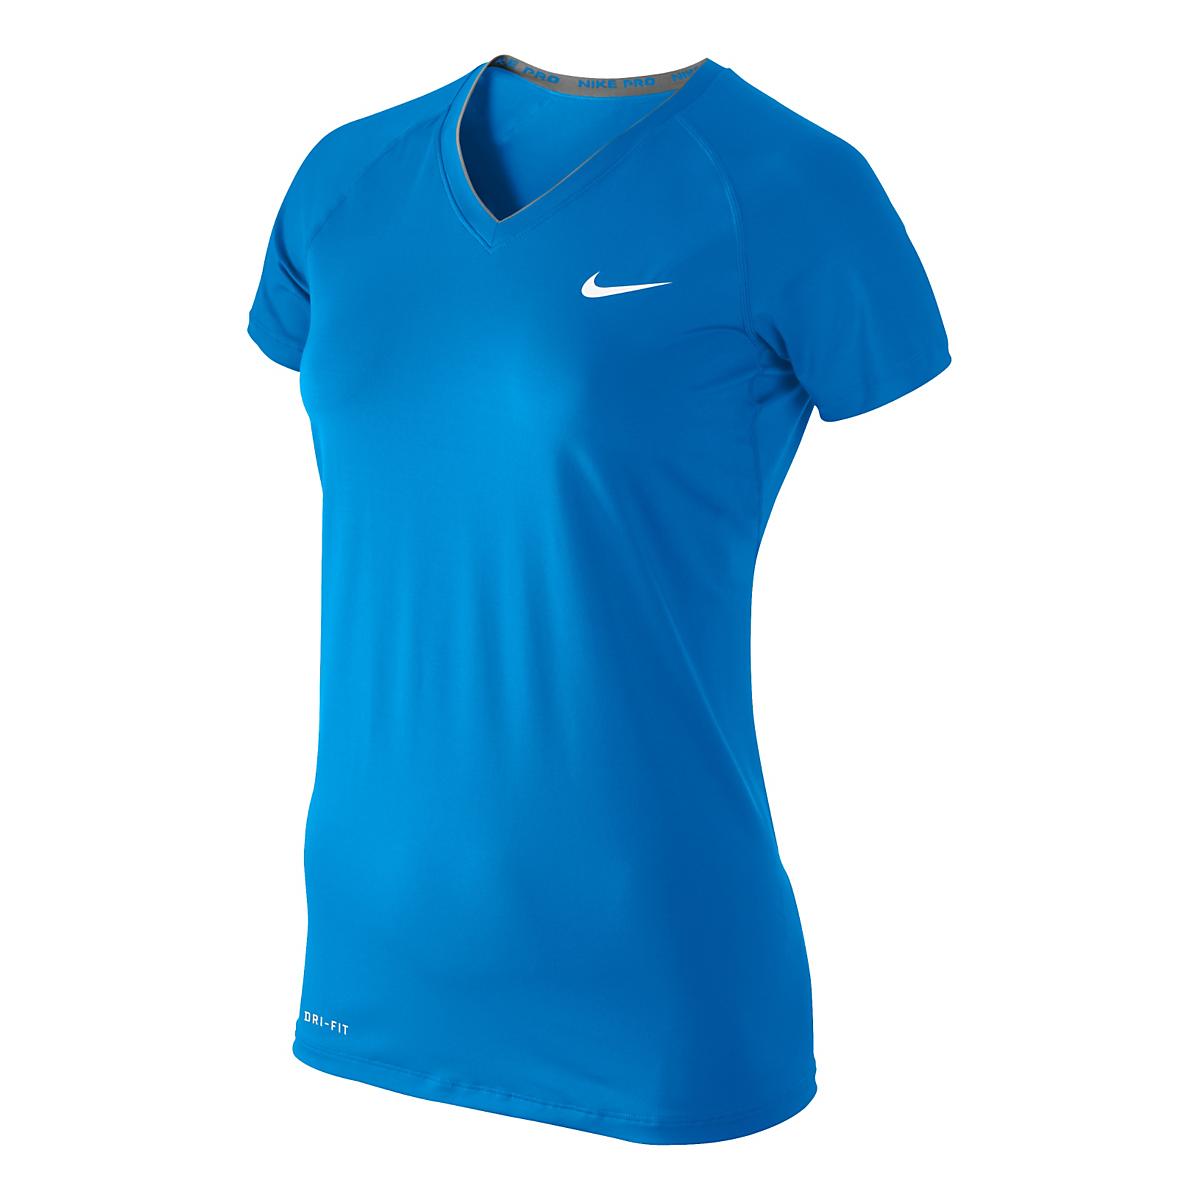 Womens Nike Pro Fitted Short Sleeve V Neck Technical Tops at Road ...